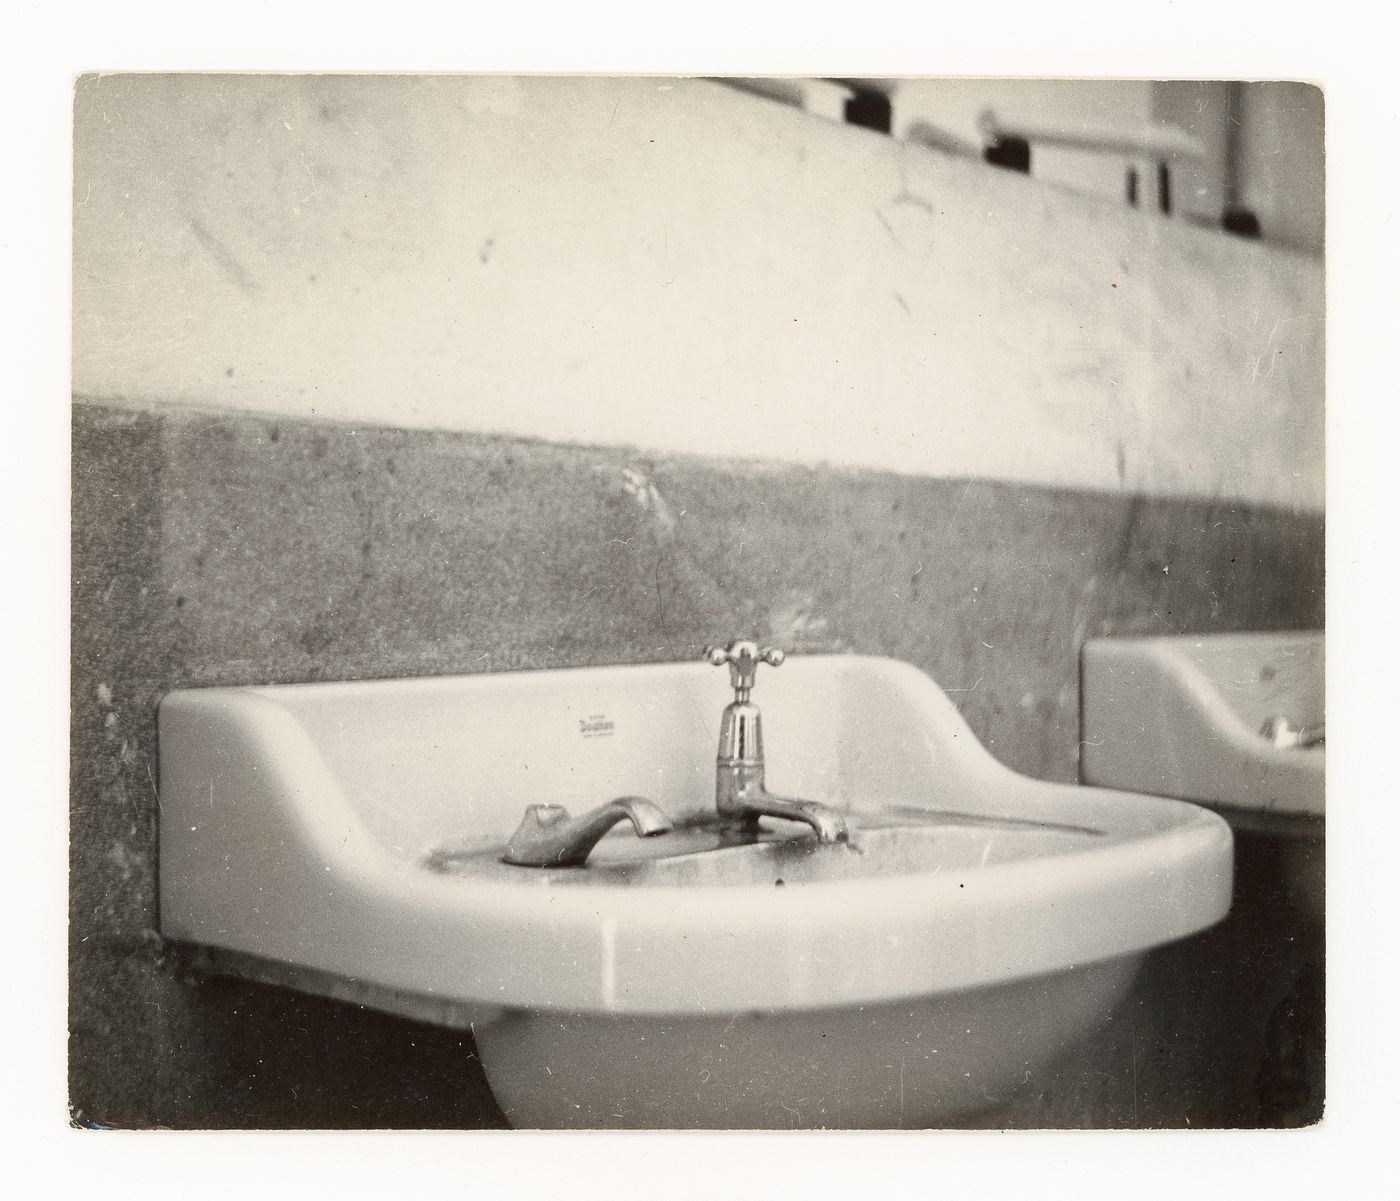 Detailed view of sanitary installation with ceramic sinks, Chandigarh, India